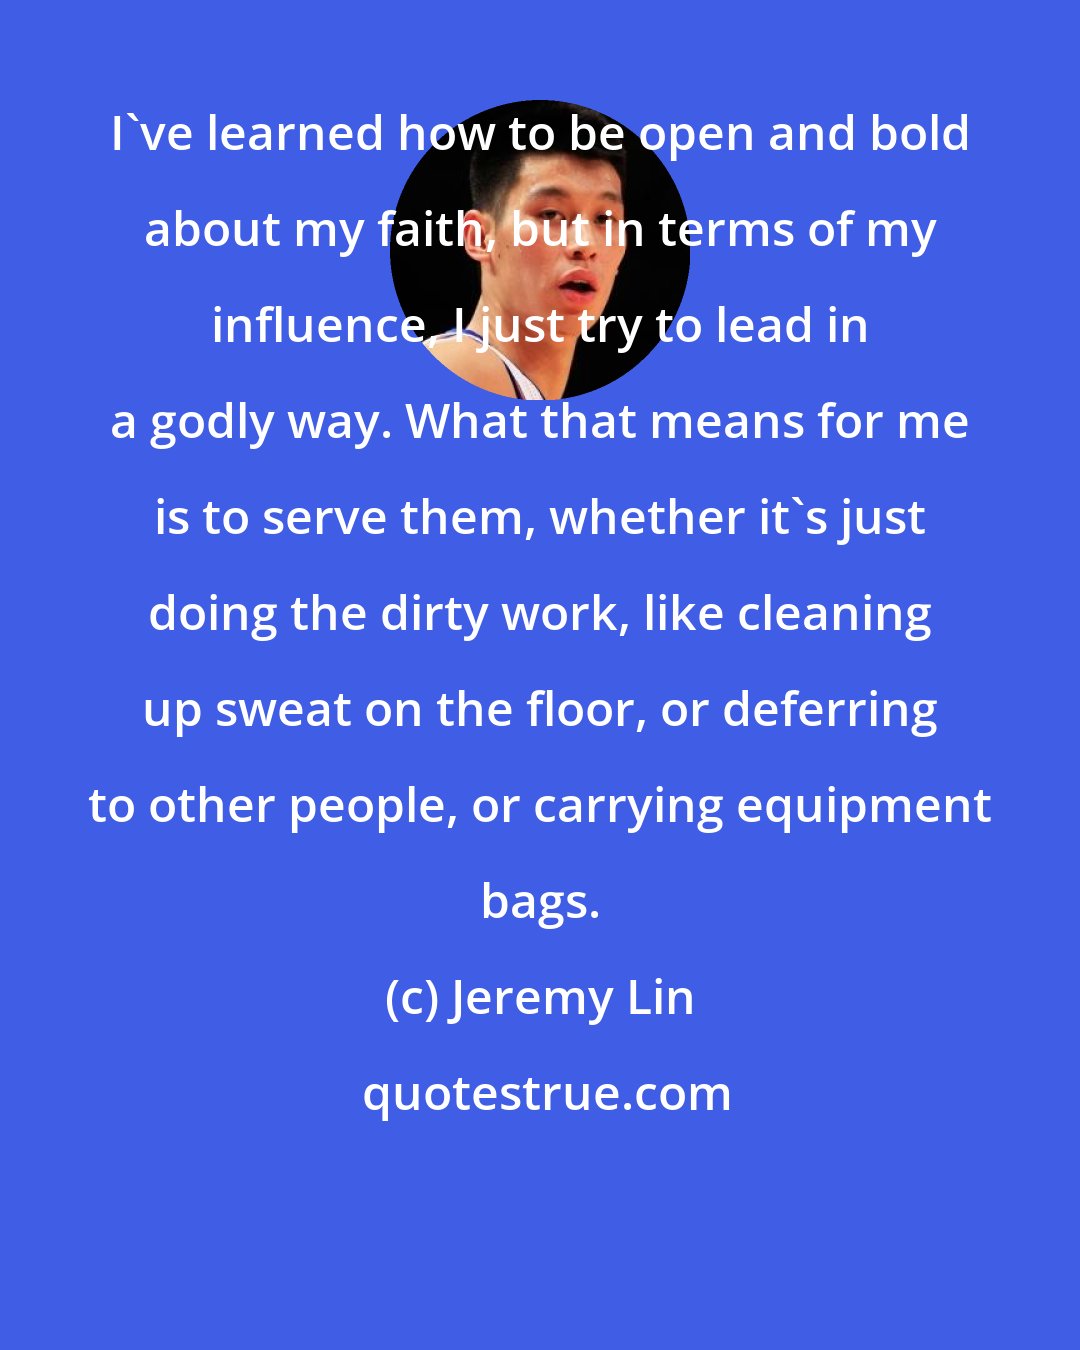 Jeremy Lin: I've learned how to be open and bold about my faith, but in terms of my influence, I just try to lead in a godly way. What that means for me is to serve them, whether it's just doing the dirty work, like cleaning up sweat on the floor, or deferring to other people, or carrying equipment bags.